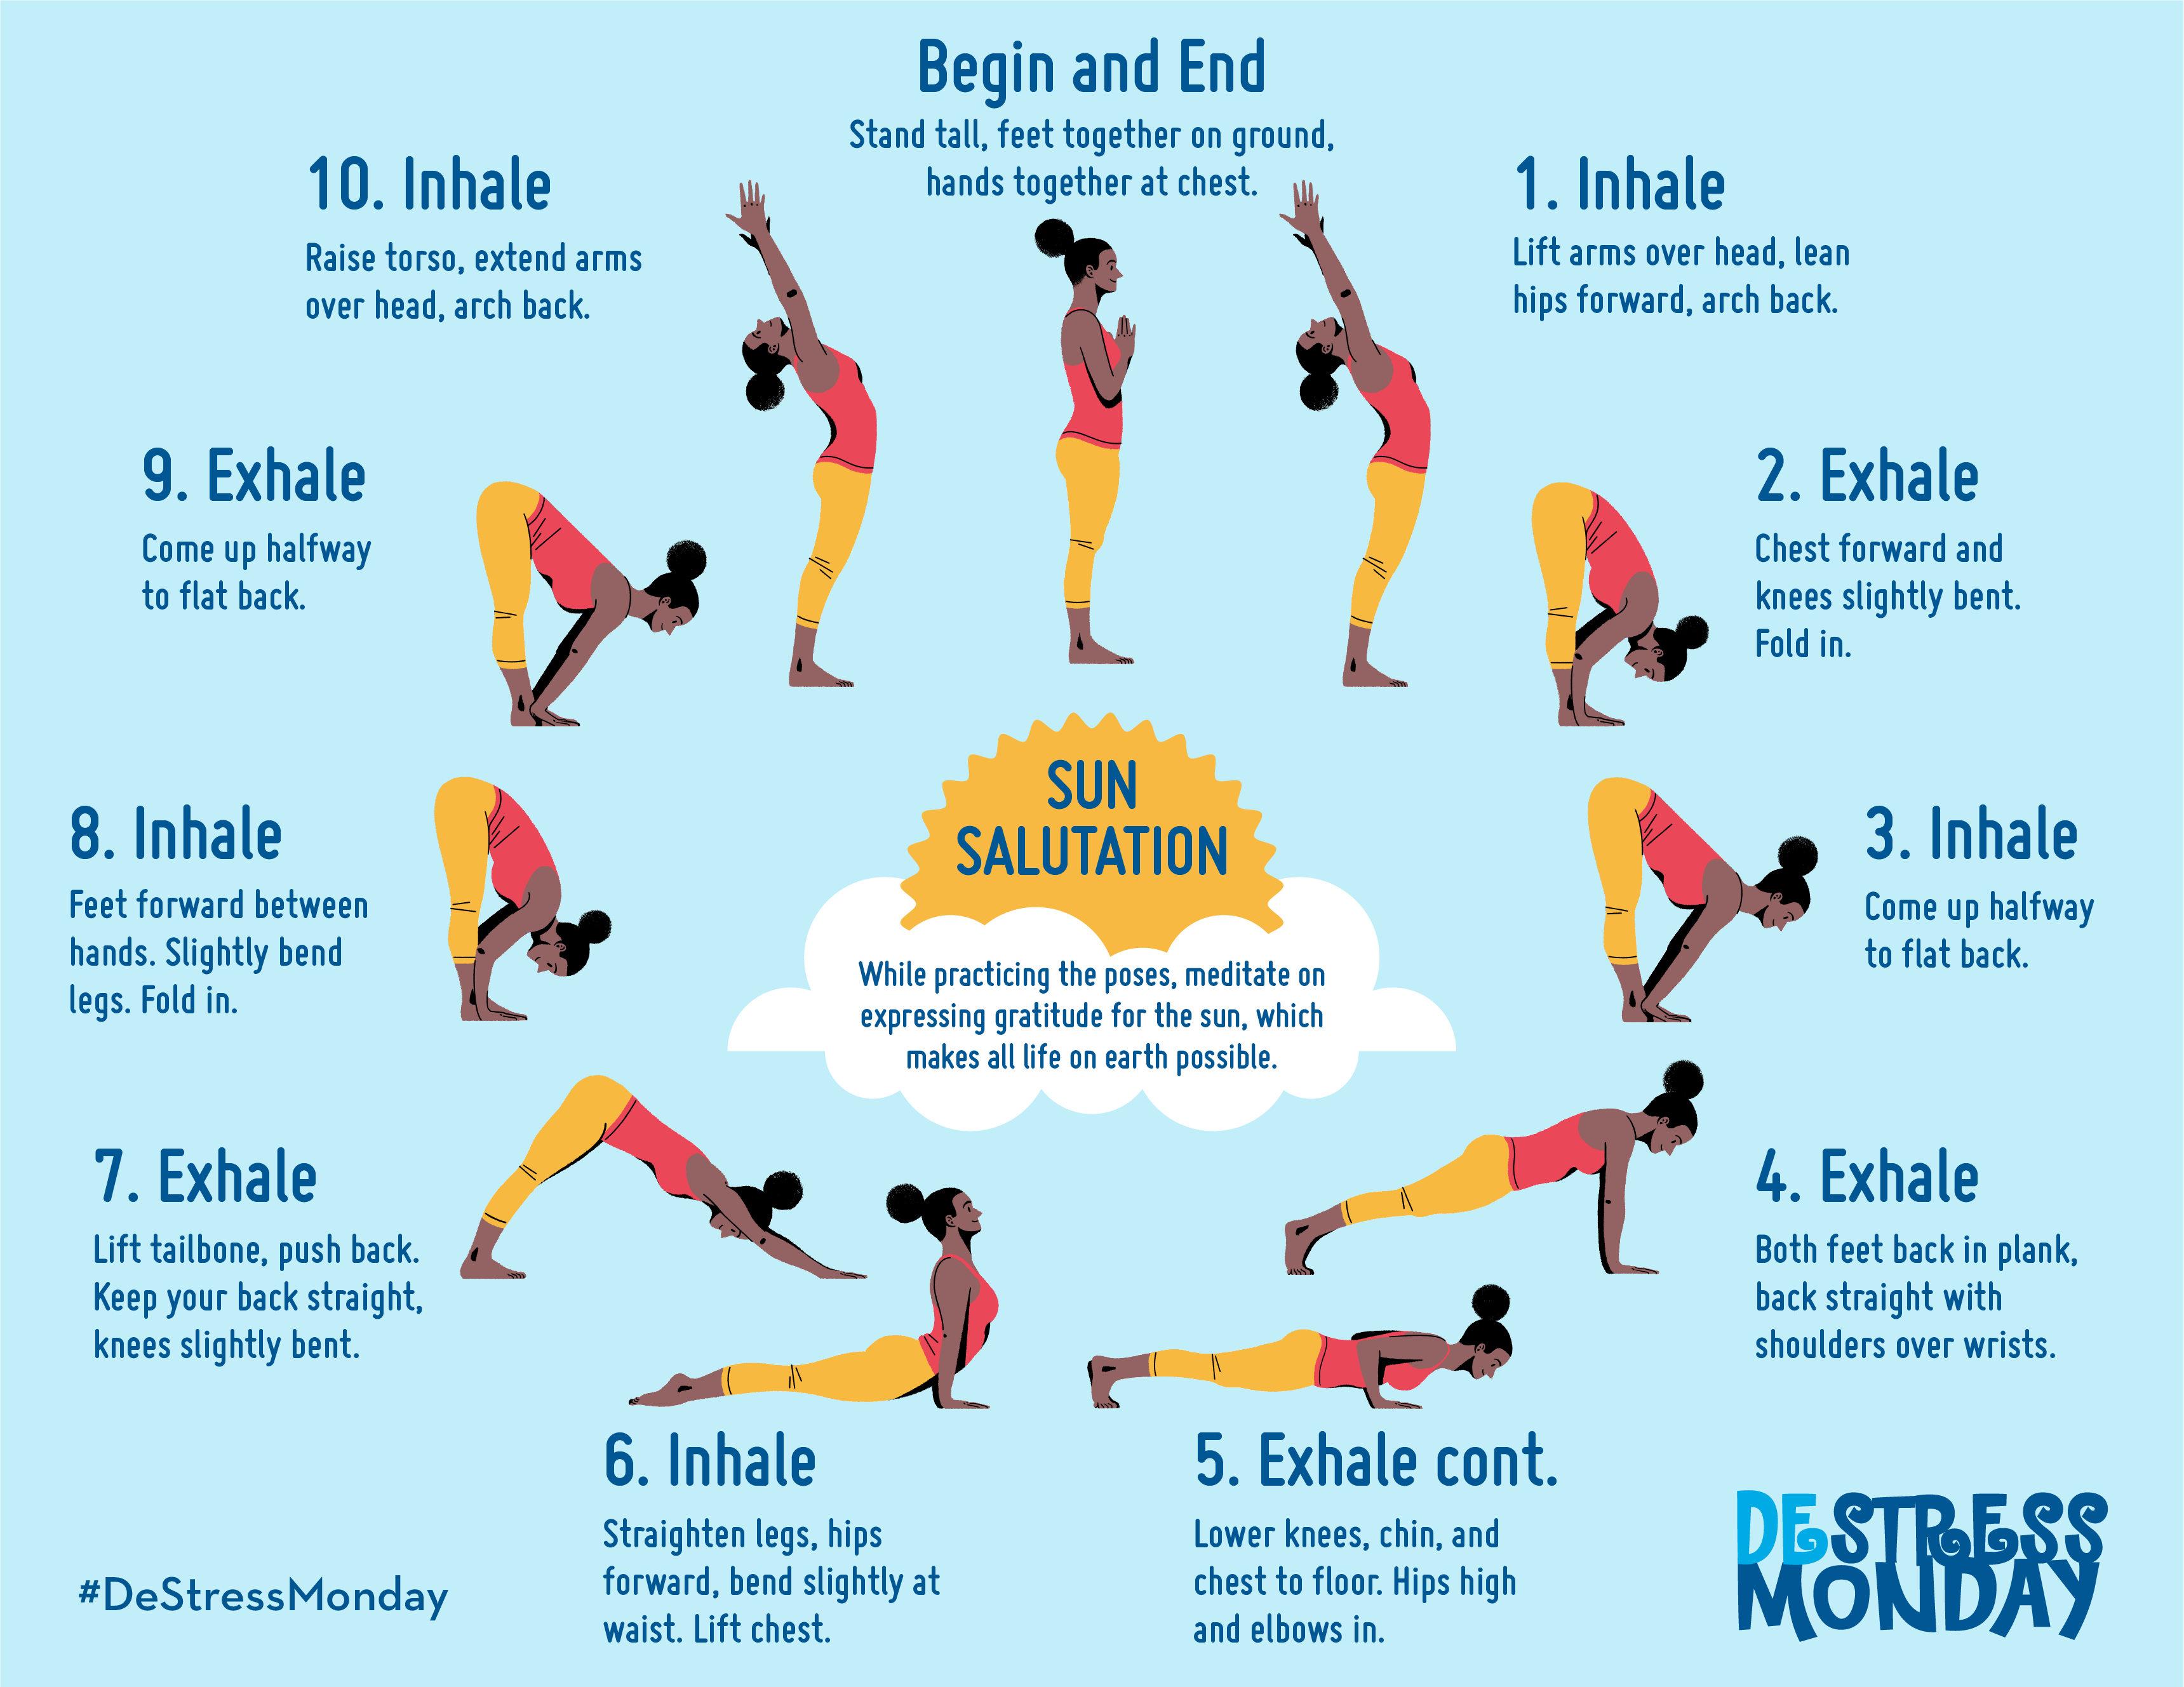 The Sun Salutation: A common yoga practice that includes a set of 12 poses including, mountain pose, forward fold, low lunge, and more.